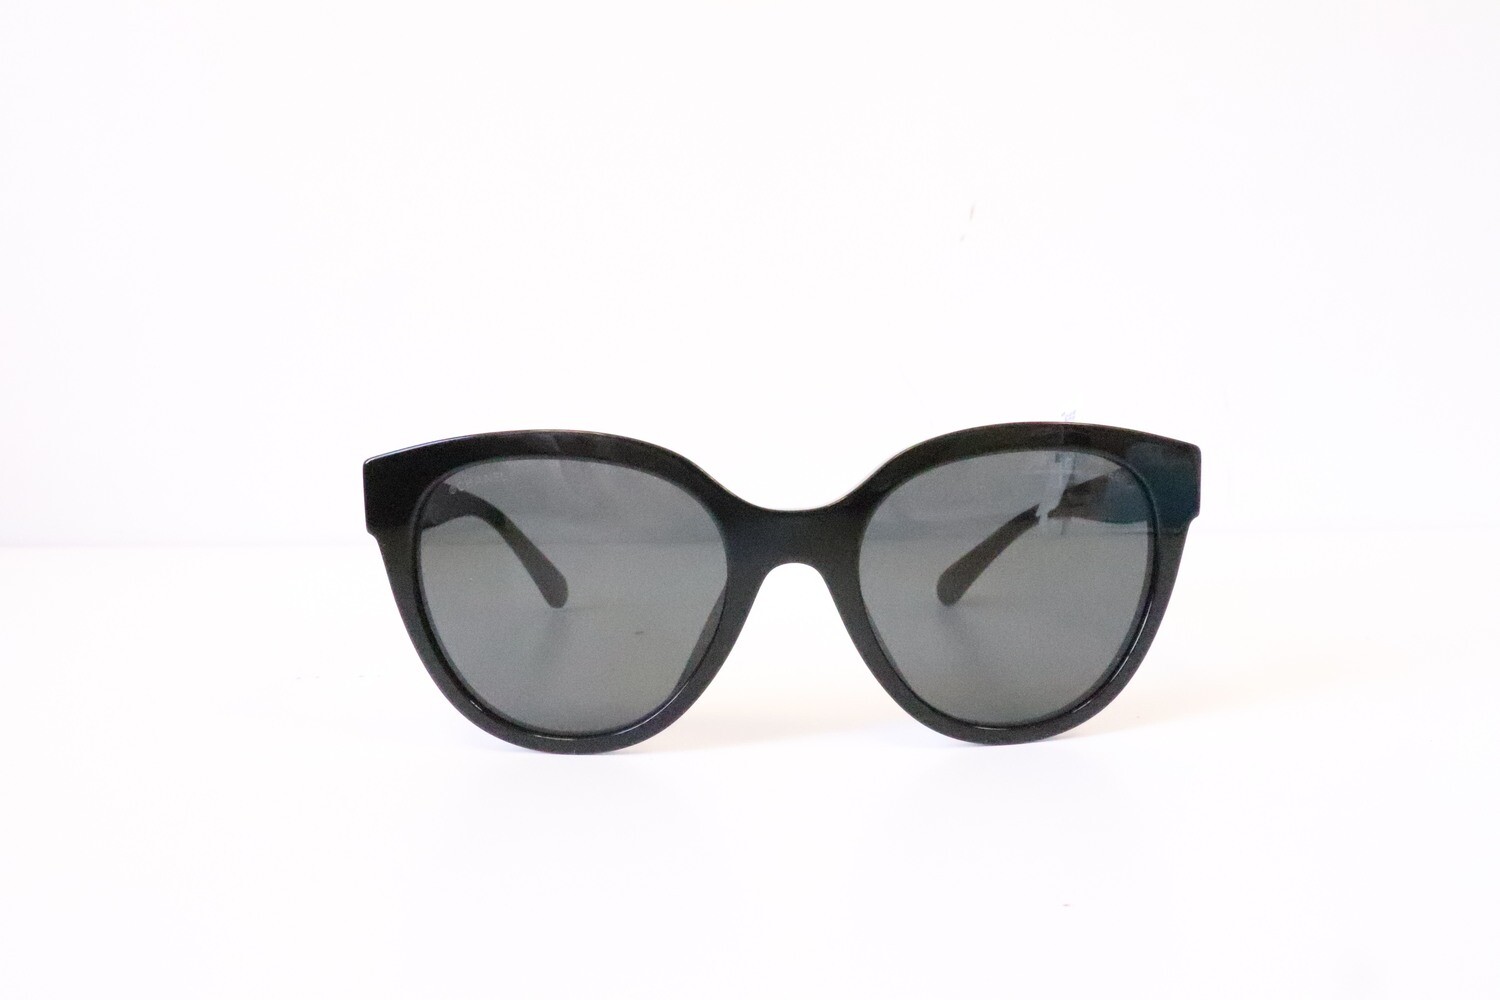 Chanel Sunglasses Black with Black Border, White Writing, New in Box